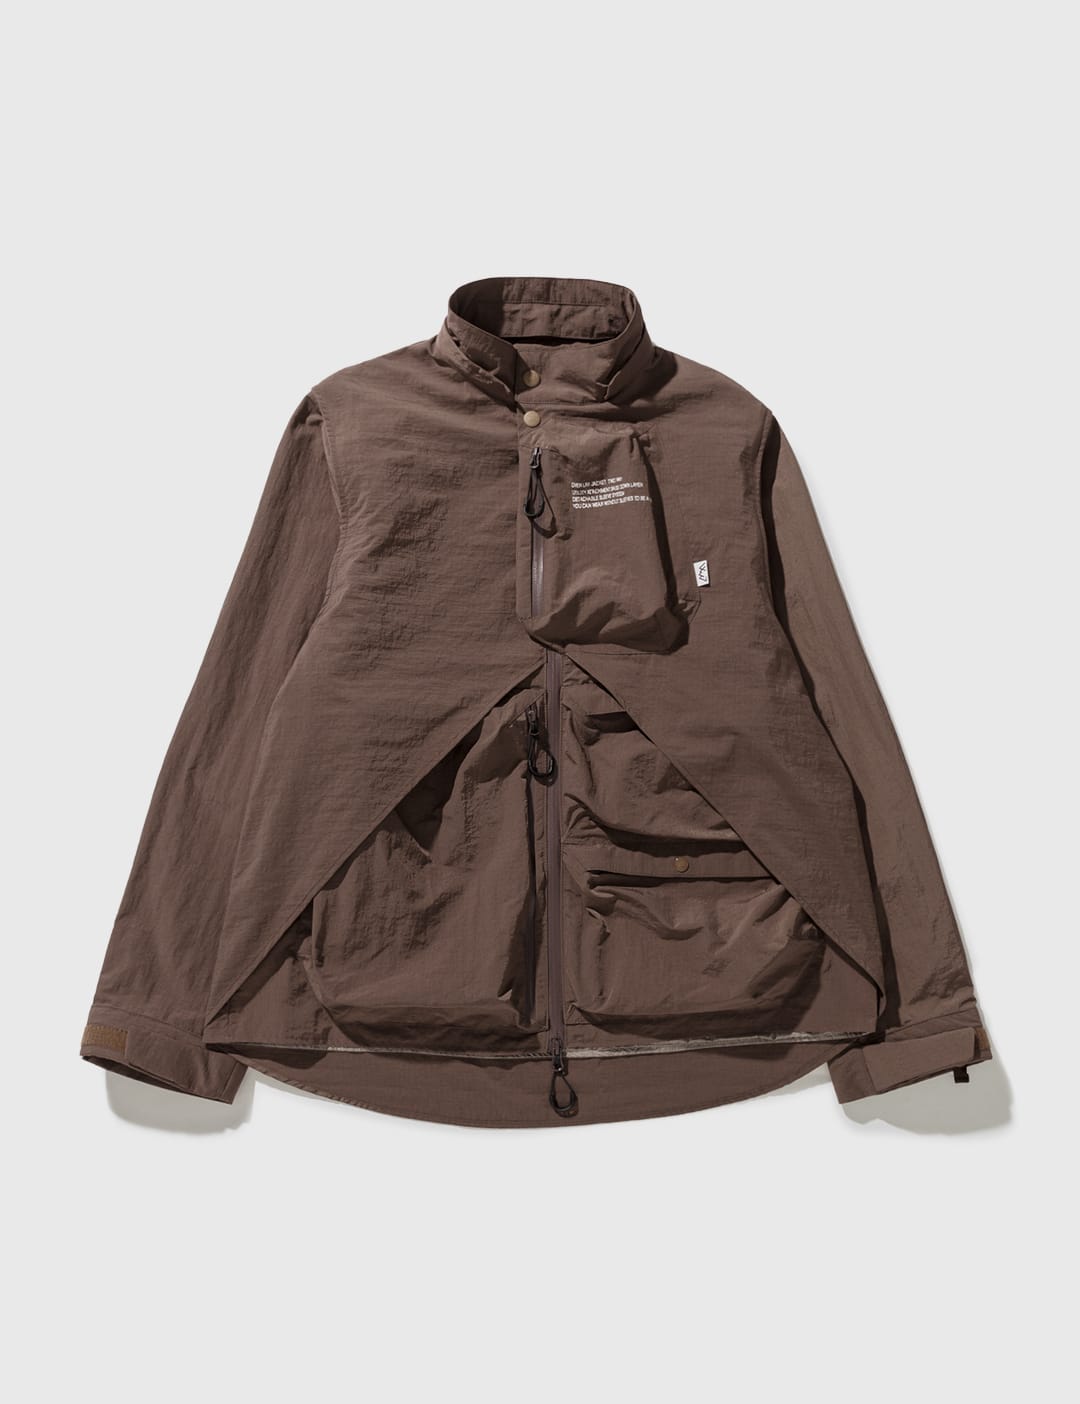 Comfy Outdoor Garment - OVERLAY JACKET | HBX - Globally Curated Fashion and  Lifestyle by Hypebeast